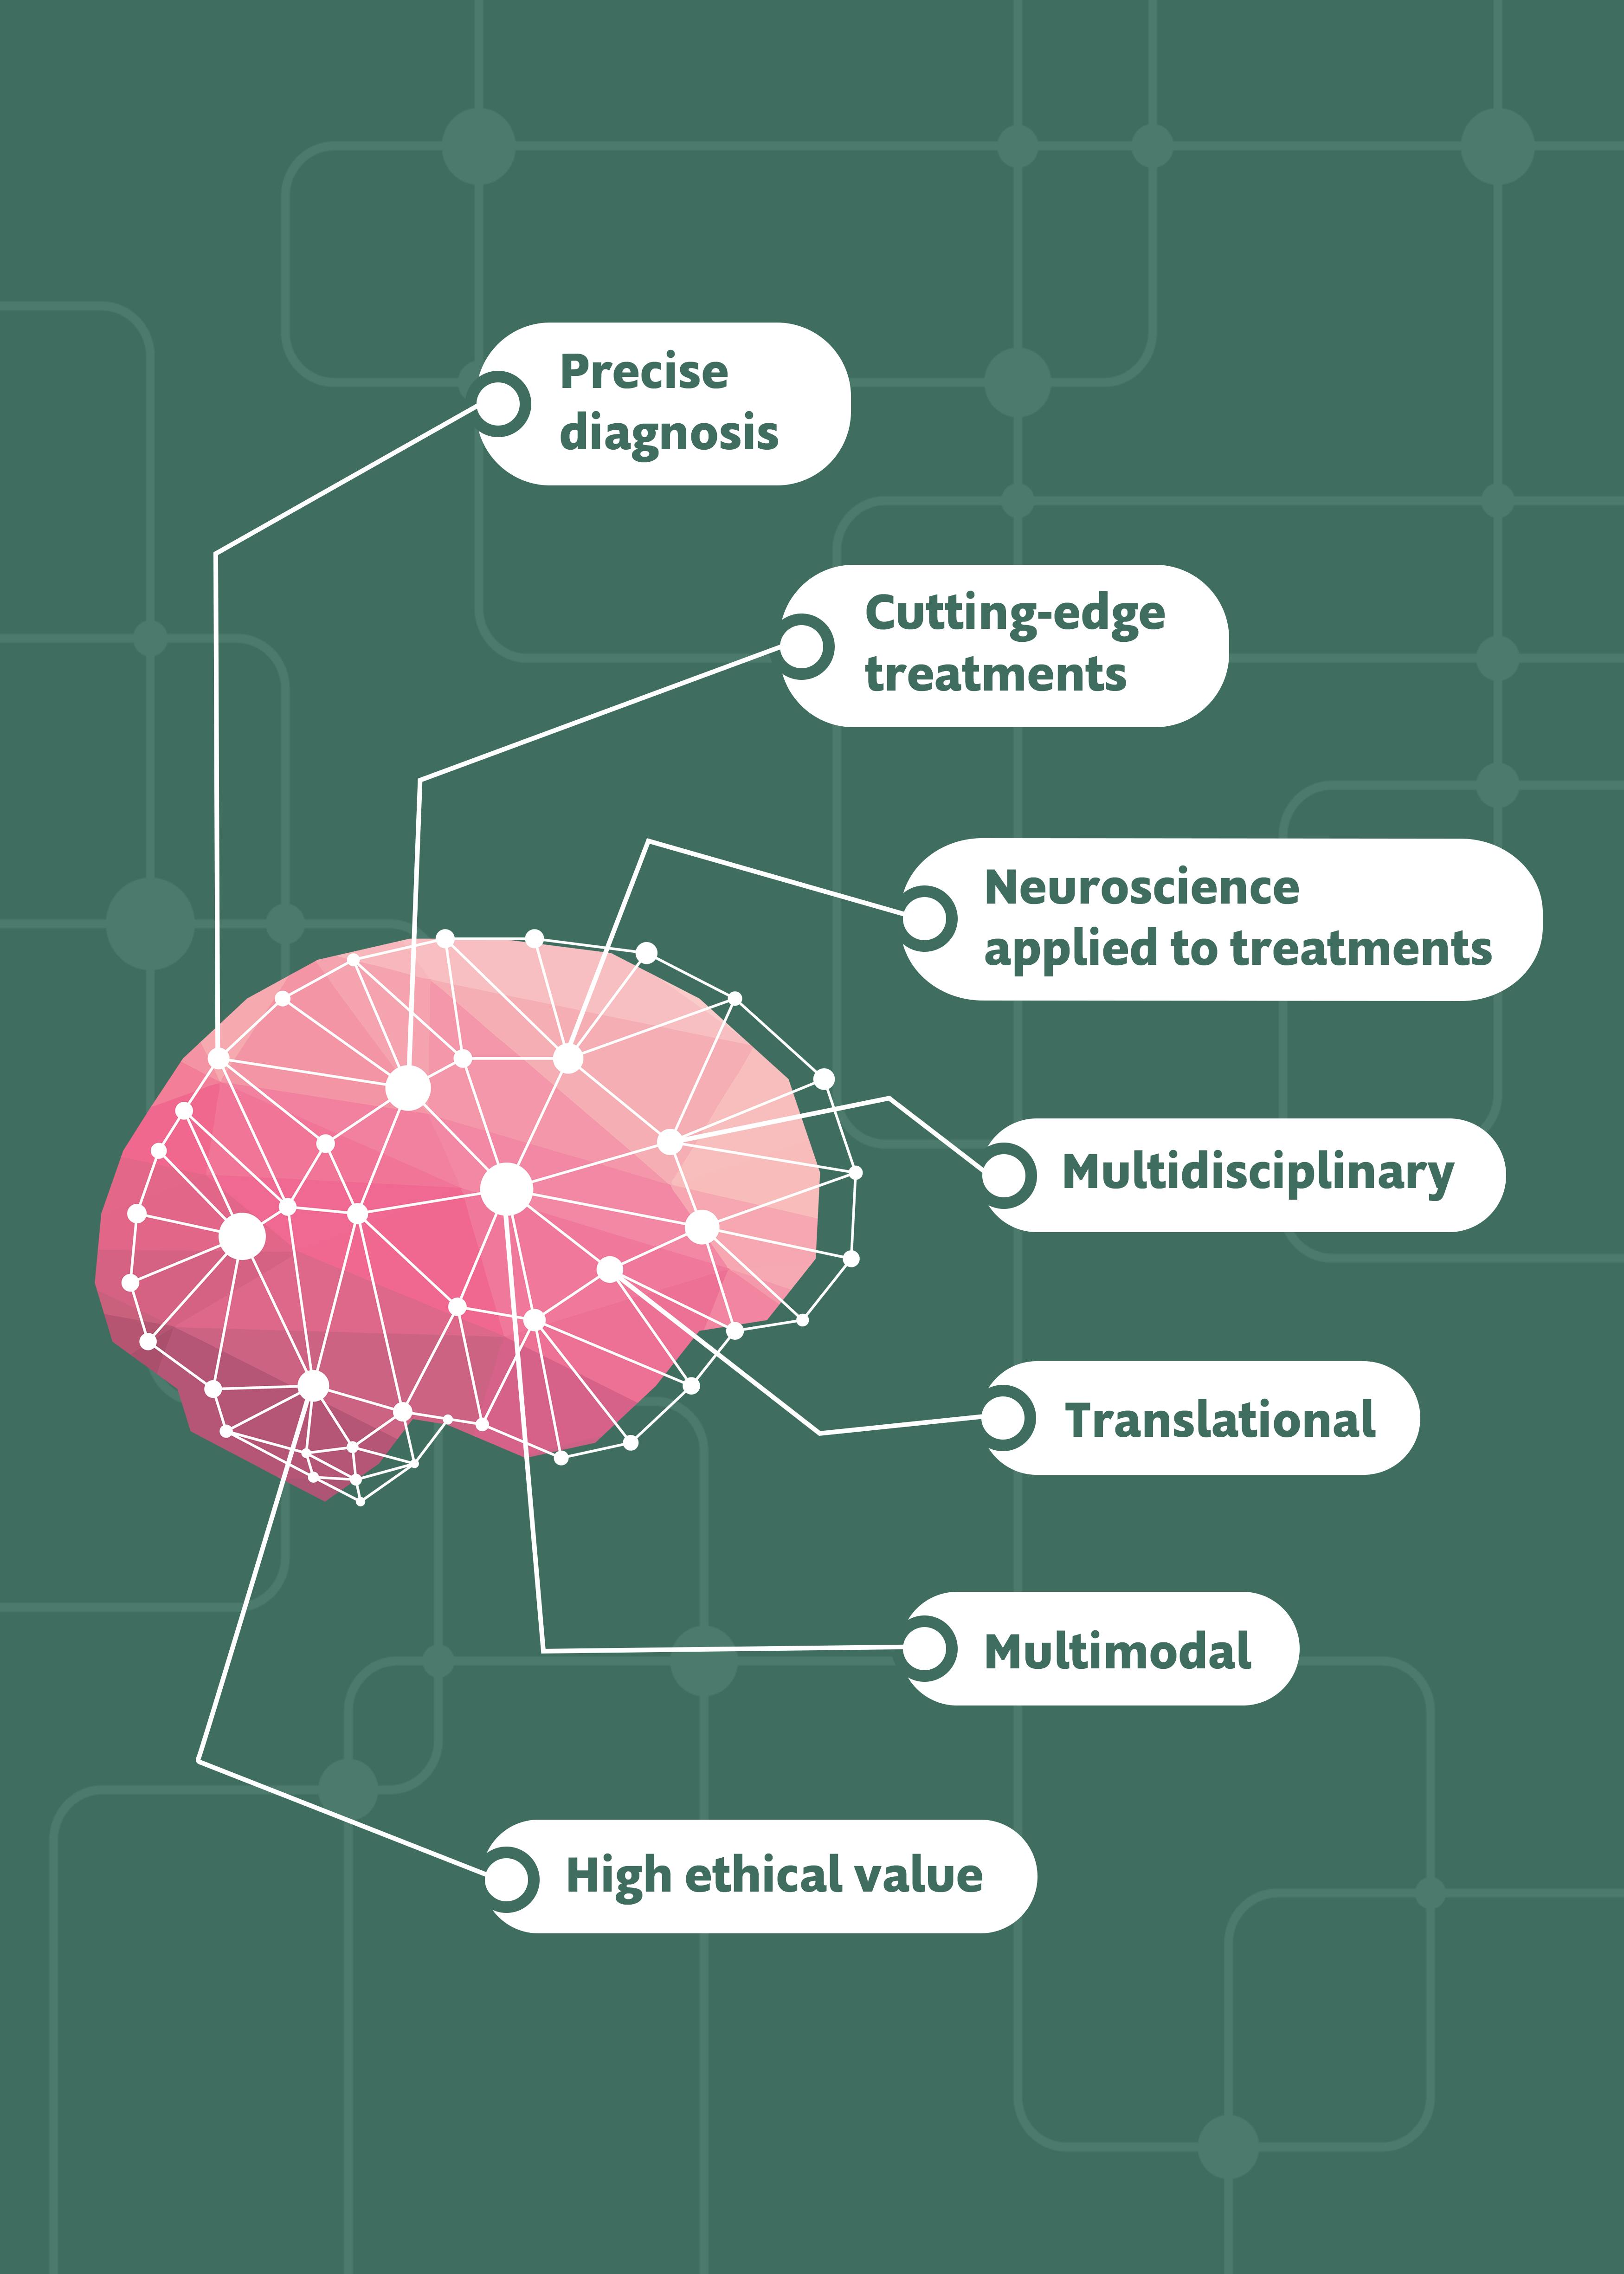 Illustration of pink brain on green background from which a series of lines lead to the following points: precise diagnosis, cutting-edge treatments, neuroscience applied to treatments, multidisciplinary, translational, multimodal, high ethical value.